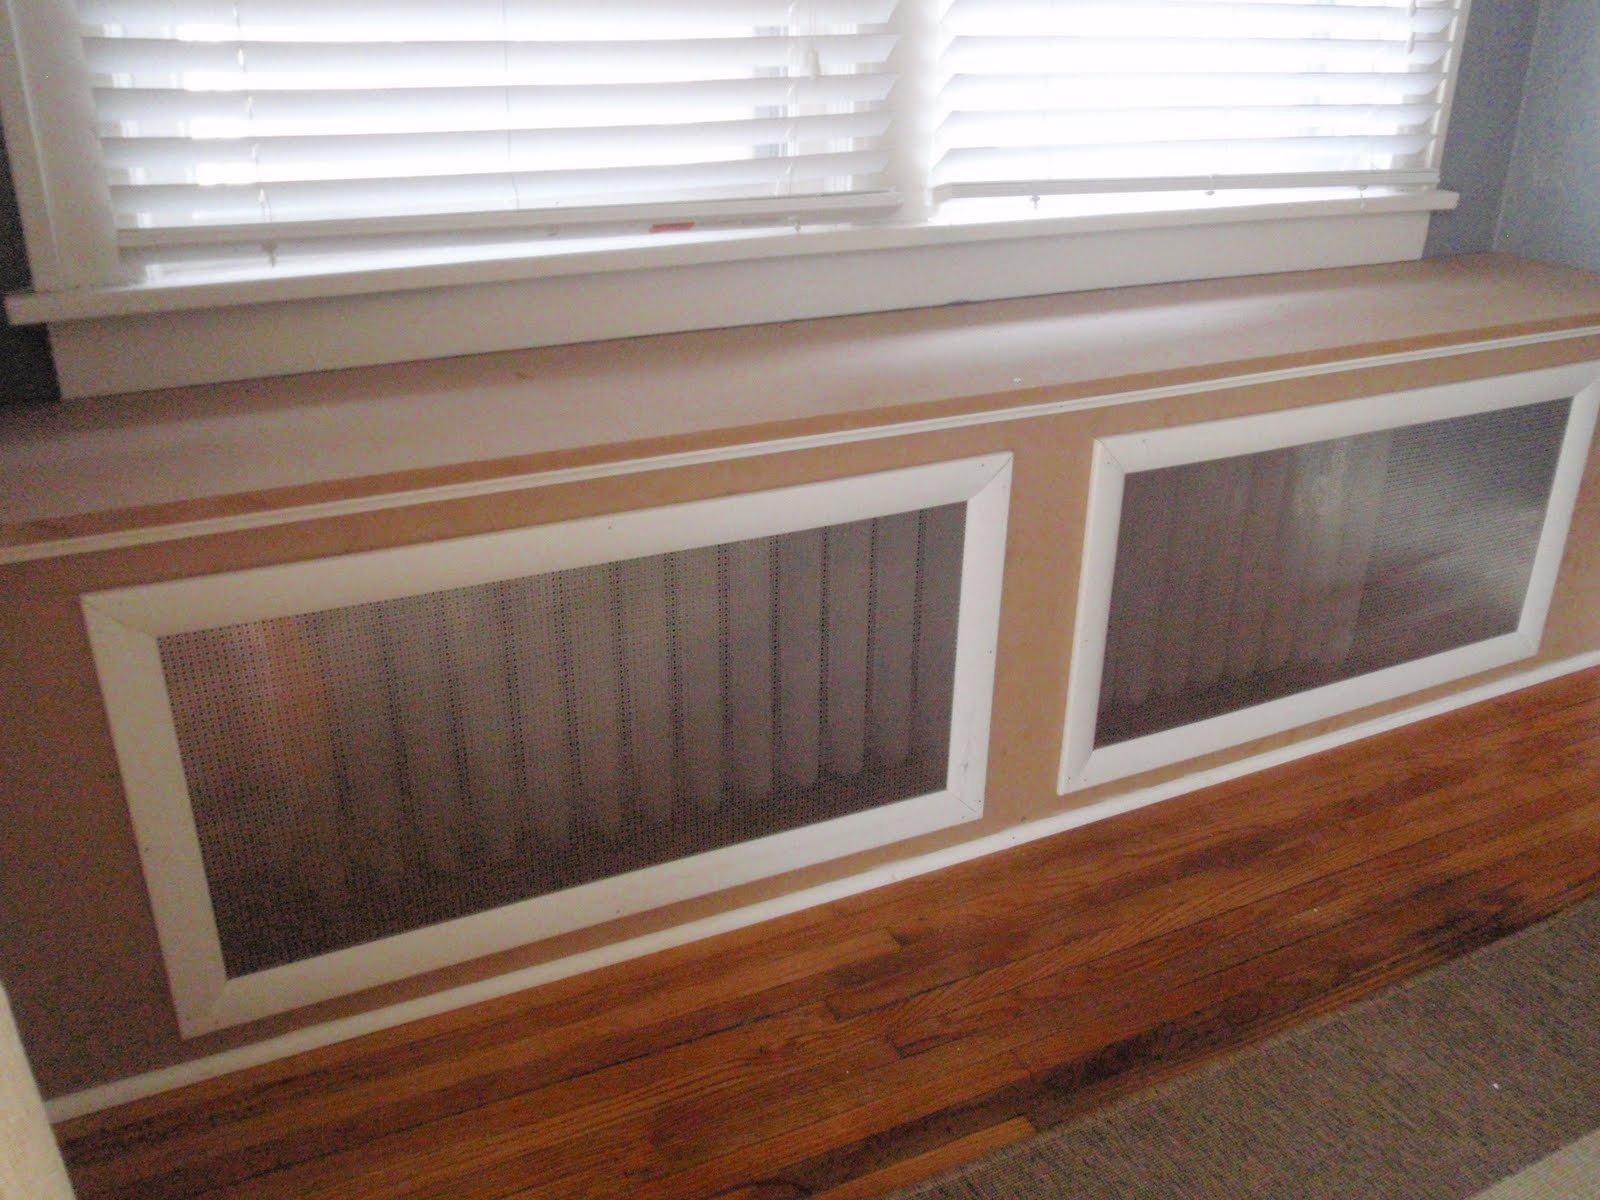 DIY window seat radiator cover that doubles as a bench